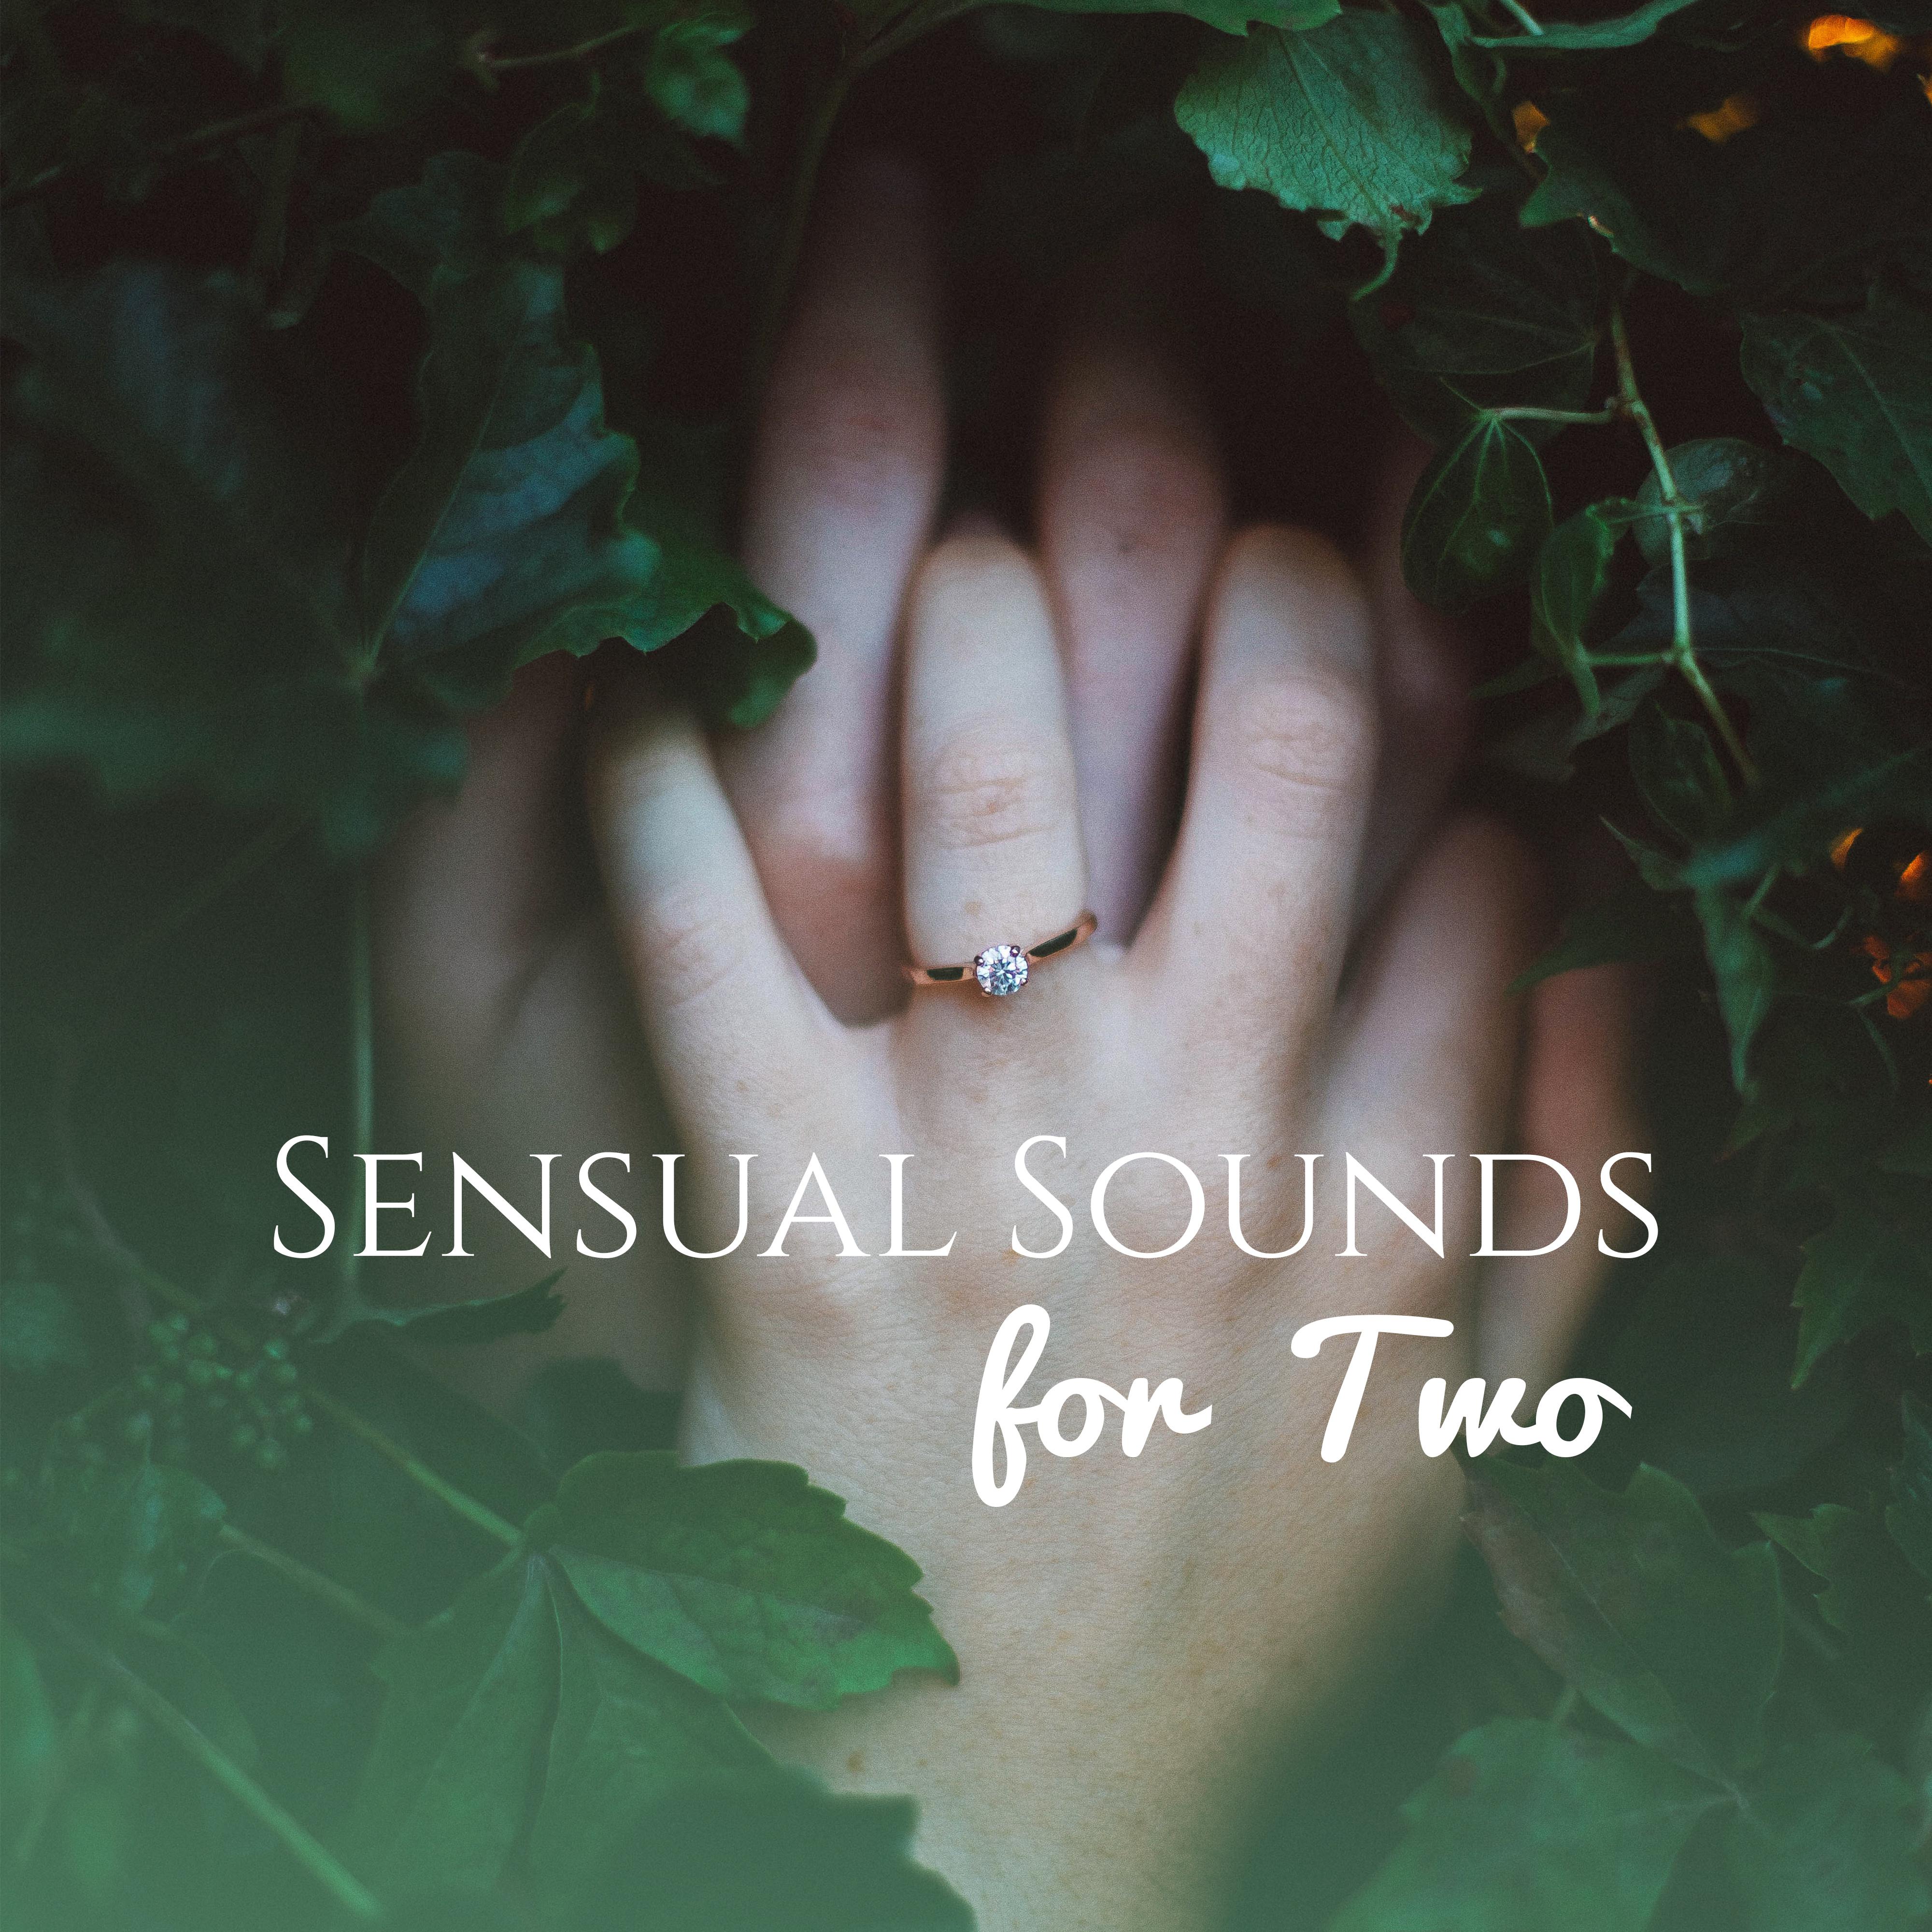 Sensual Sounds for Two  Music for Tantric , Made to Love, New Age Relaxation, Hot Music, Pure Relaxation